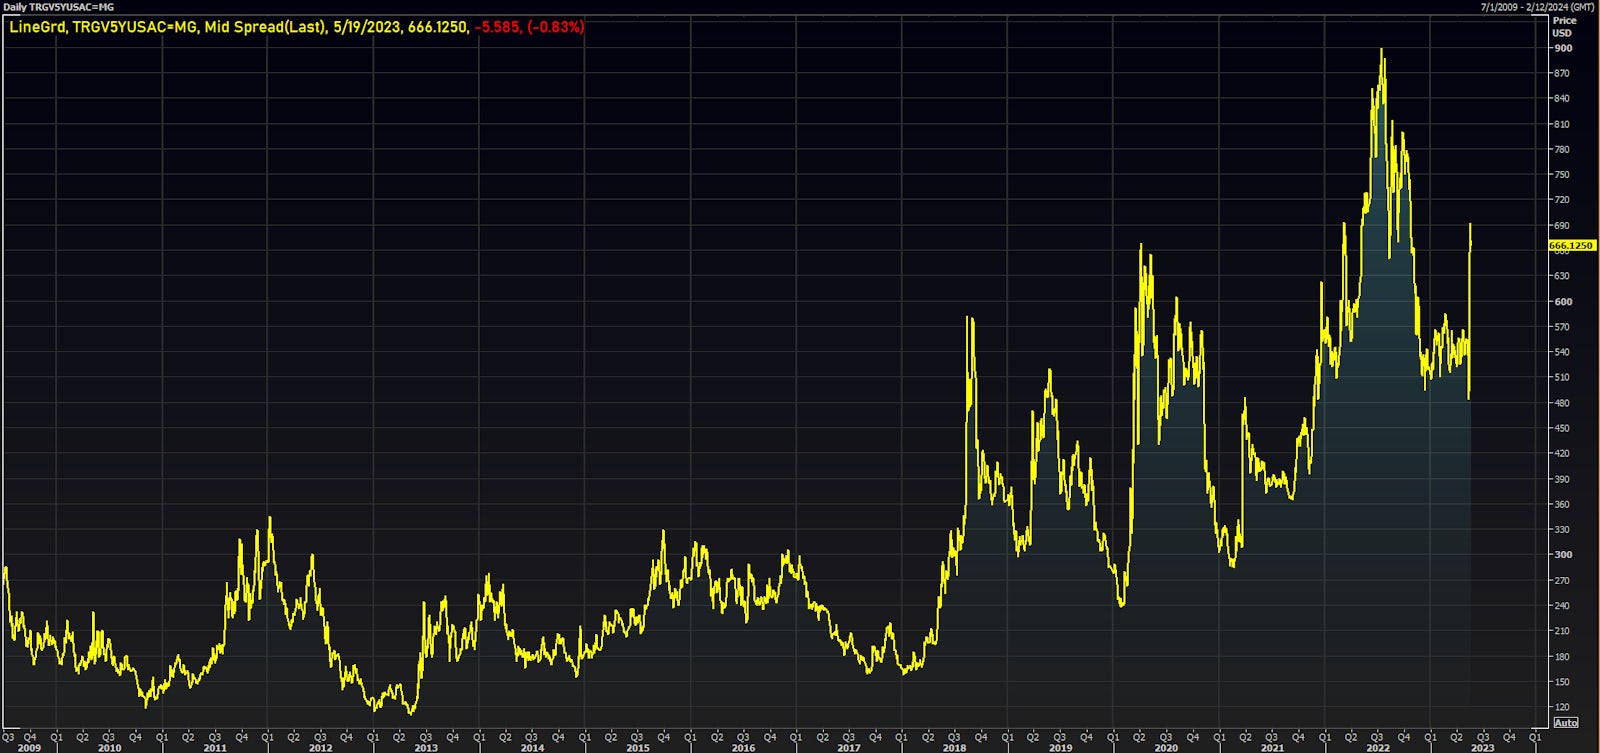 Turkish Government 5Y USD CDS Mid Spread | Source: Refinitiv